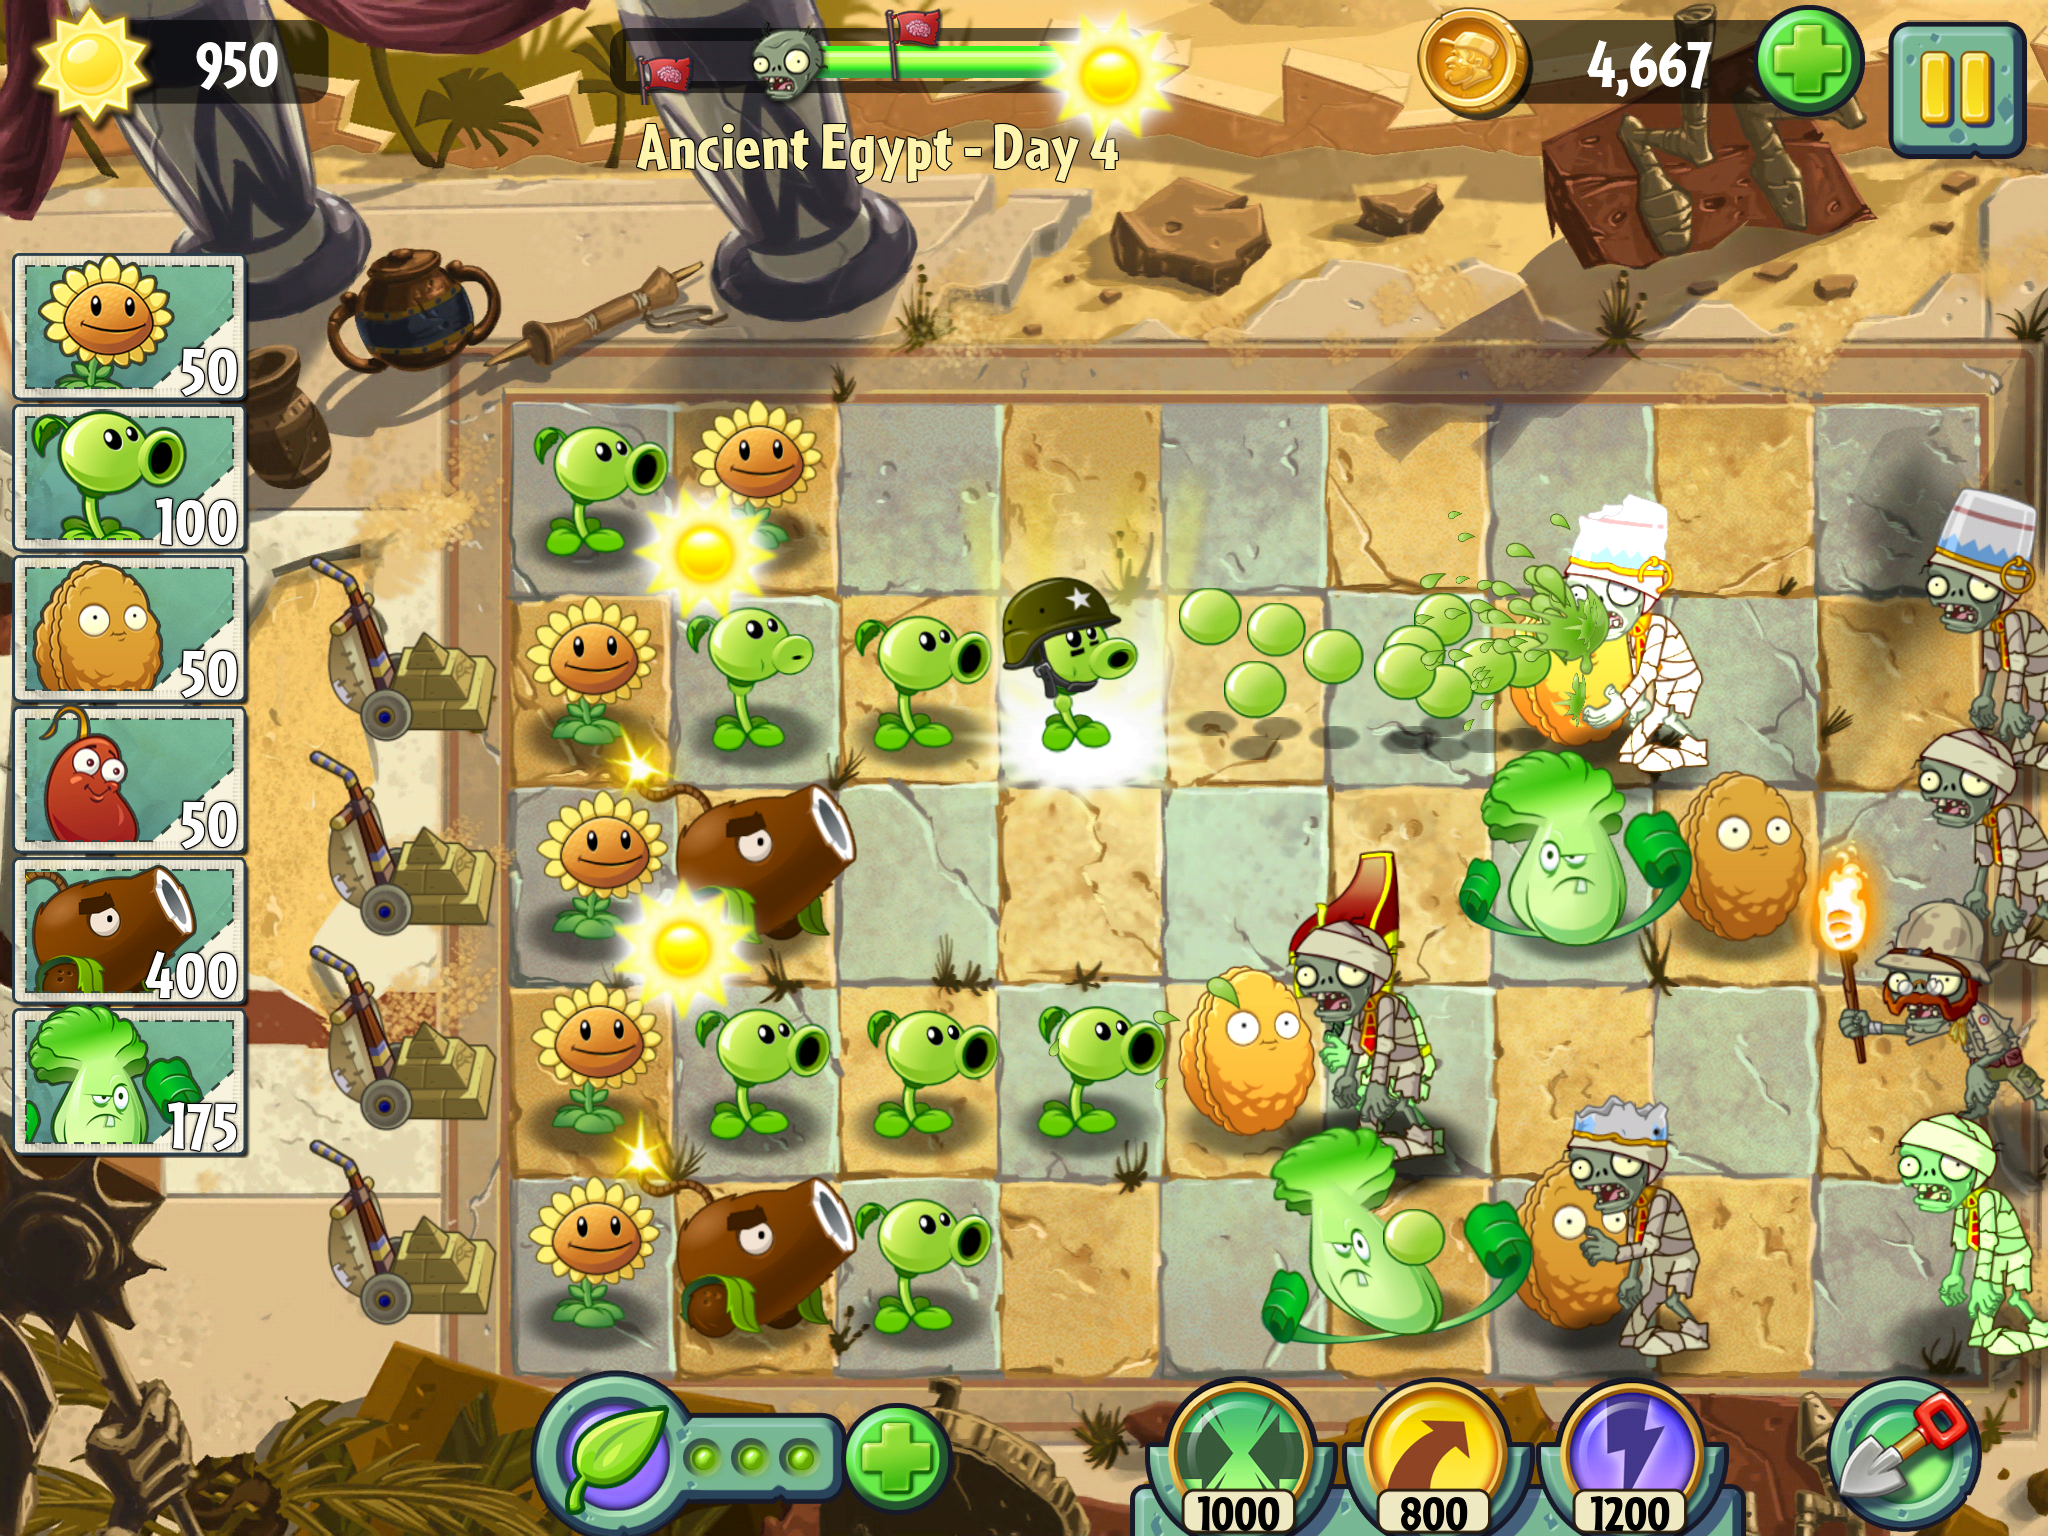 Plants vs. Zombies 2: It's About Time - game screenshots at Riot Pixels,  images